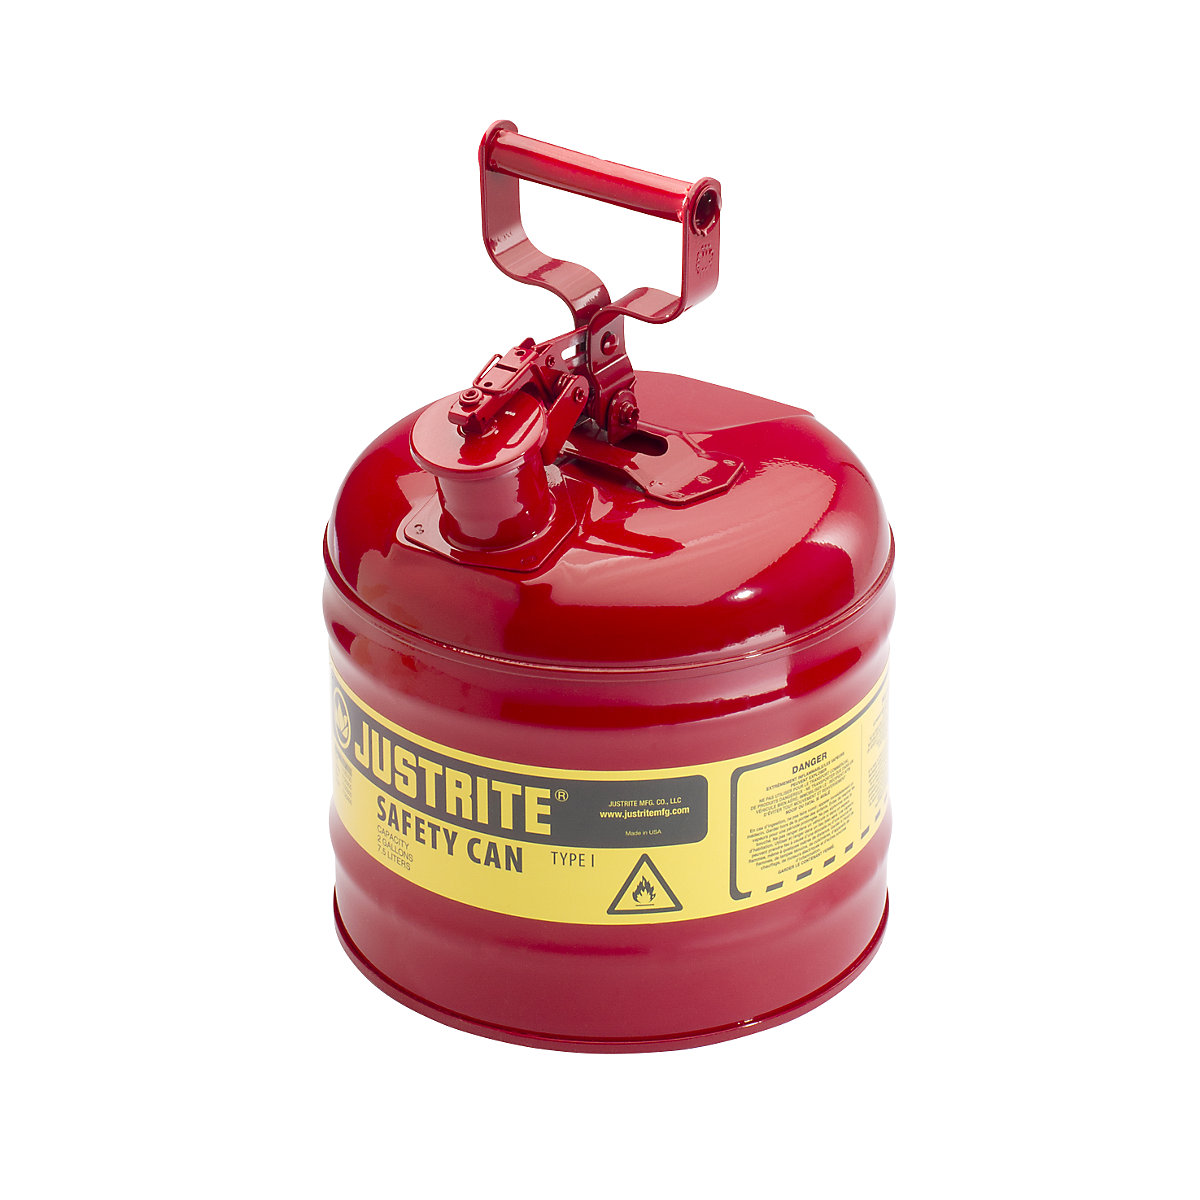 Steel safety container – Justrite